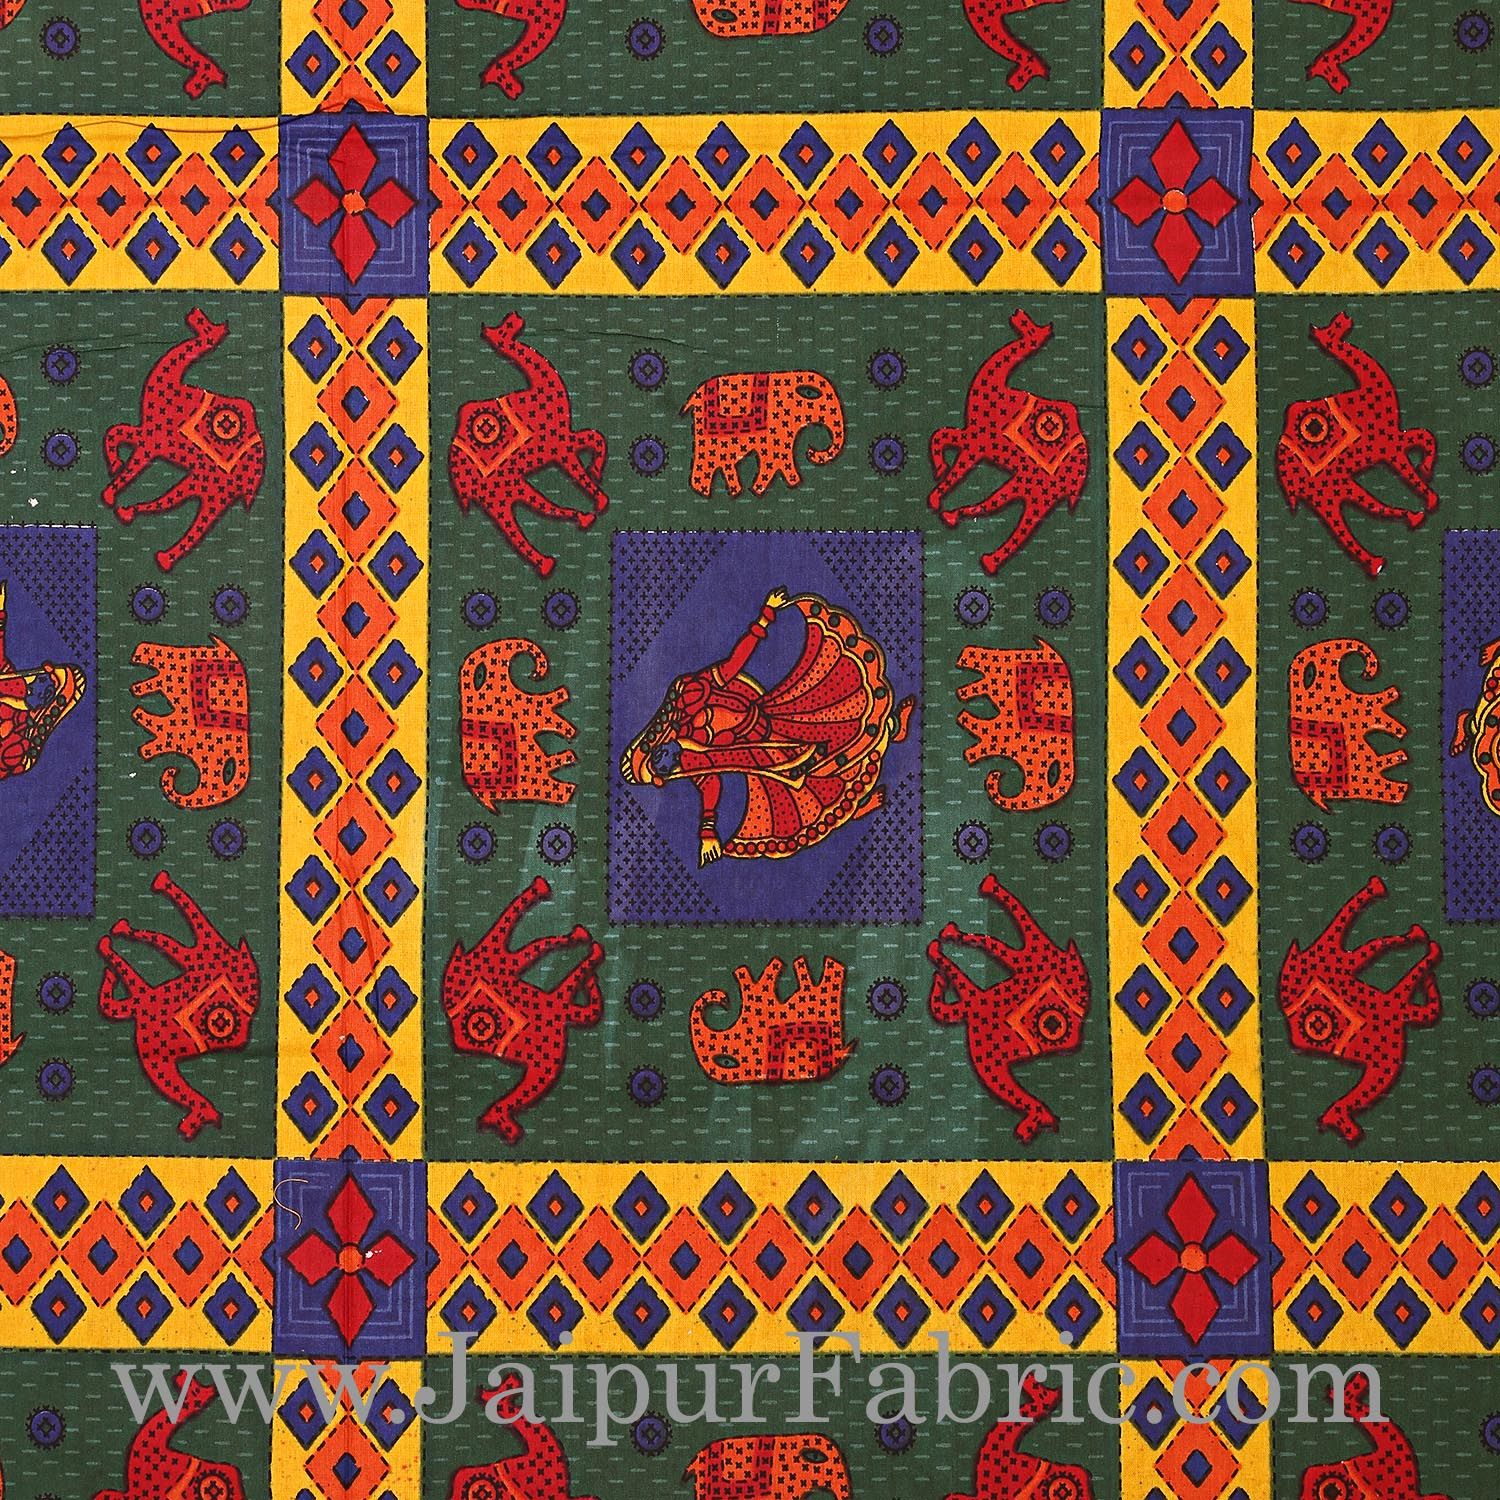 Blue Border Blue Green Base Gujri Dance In Square Pattern Cotton Double Bed Sheet